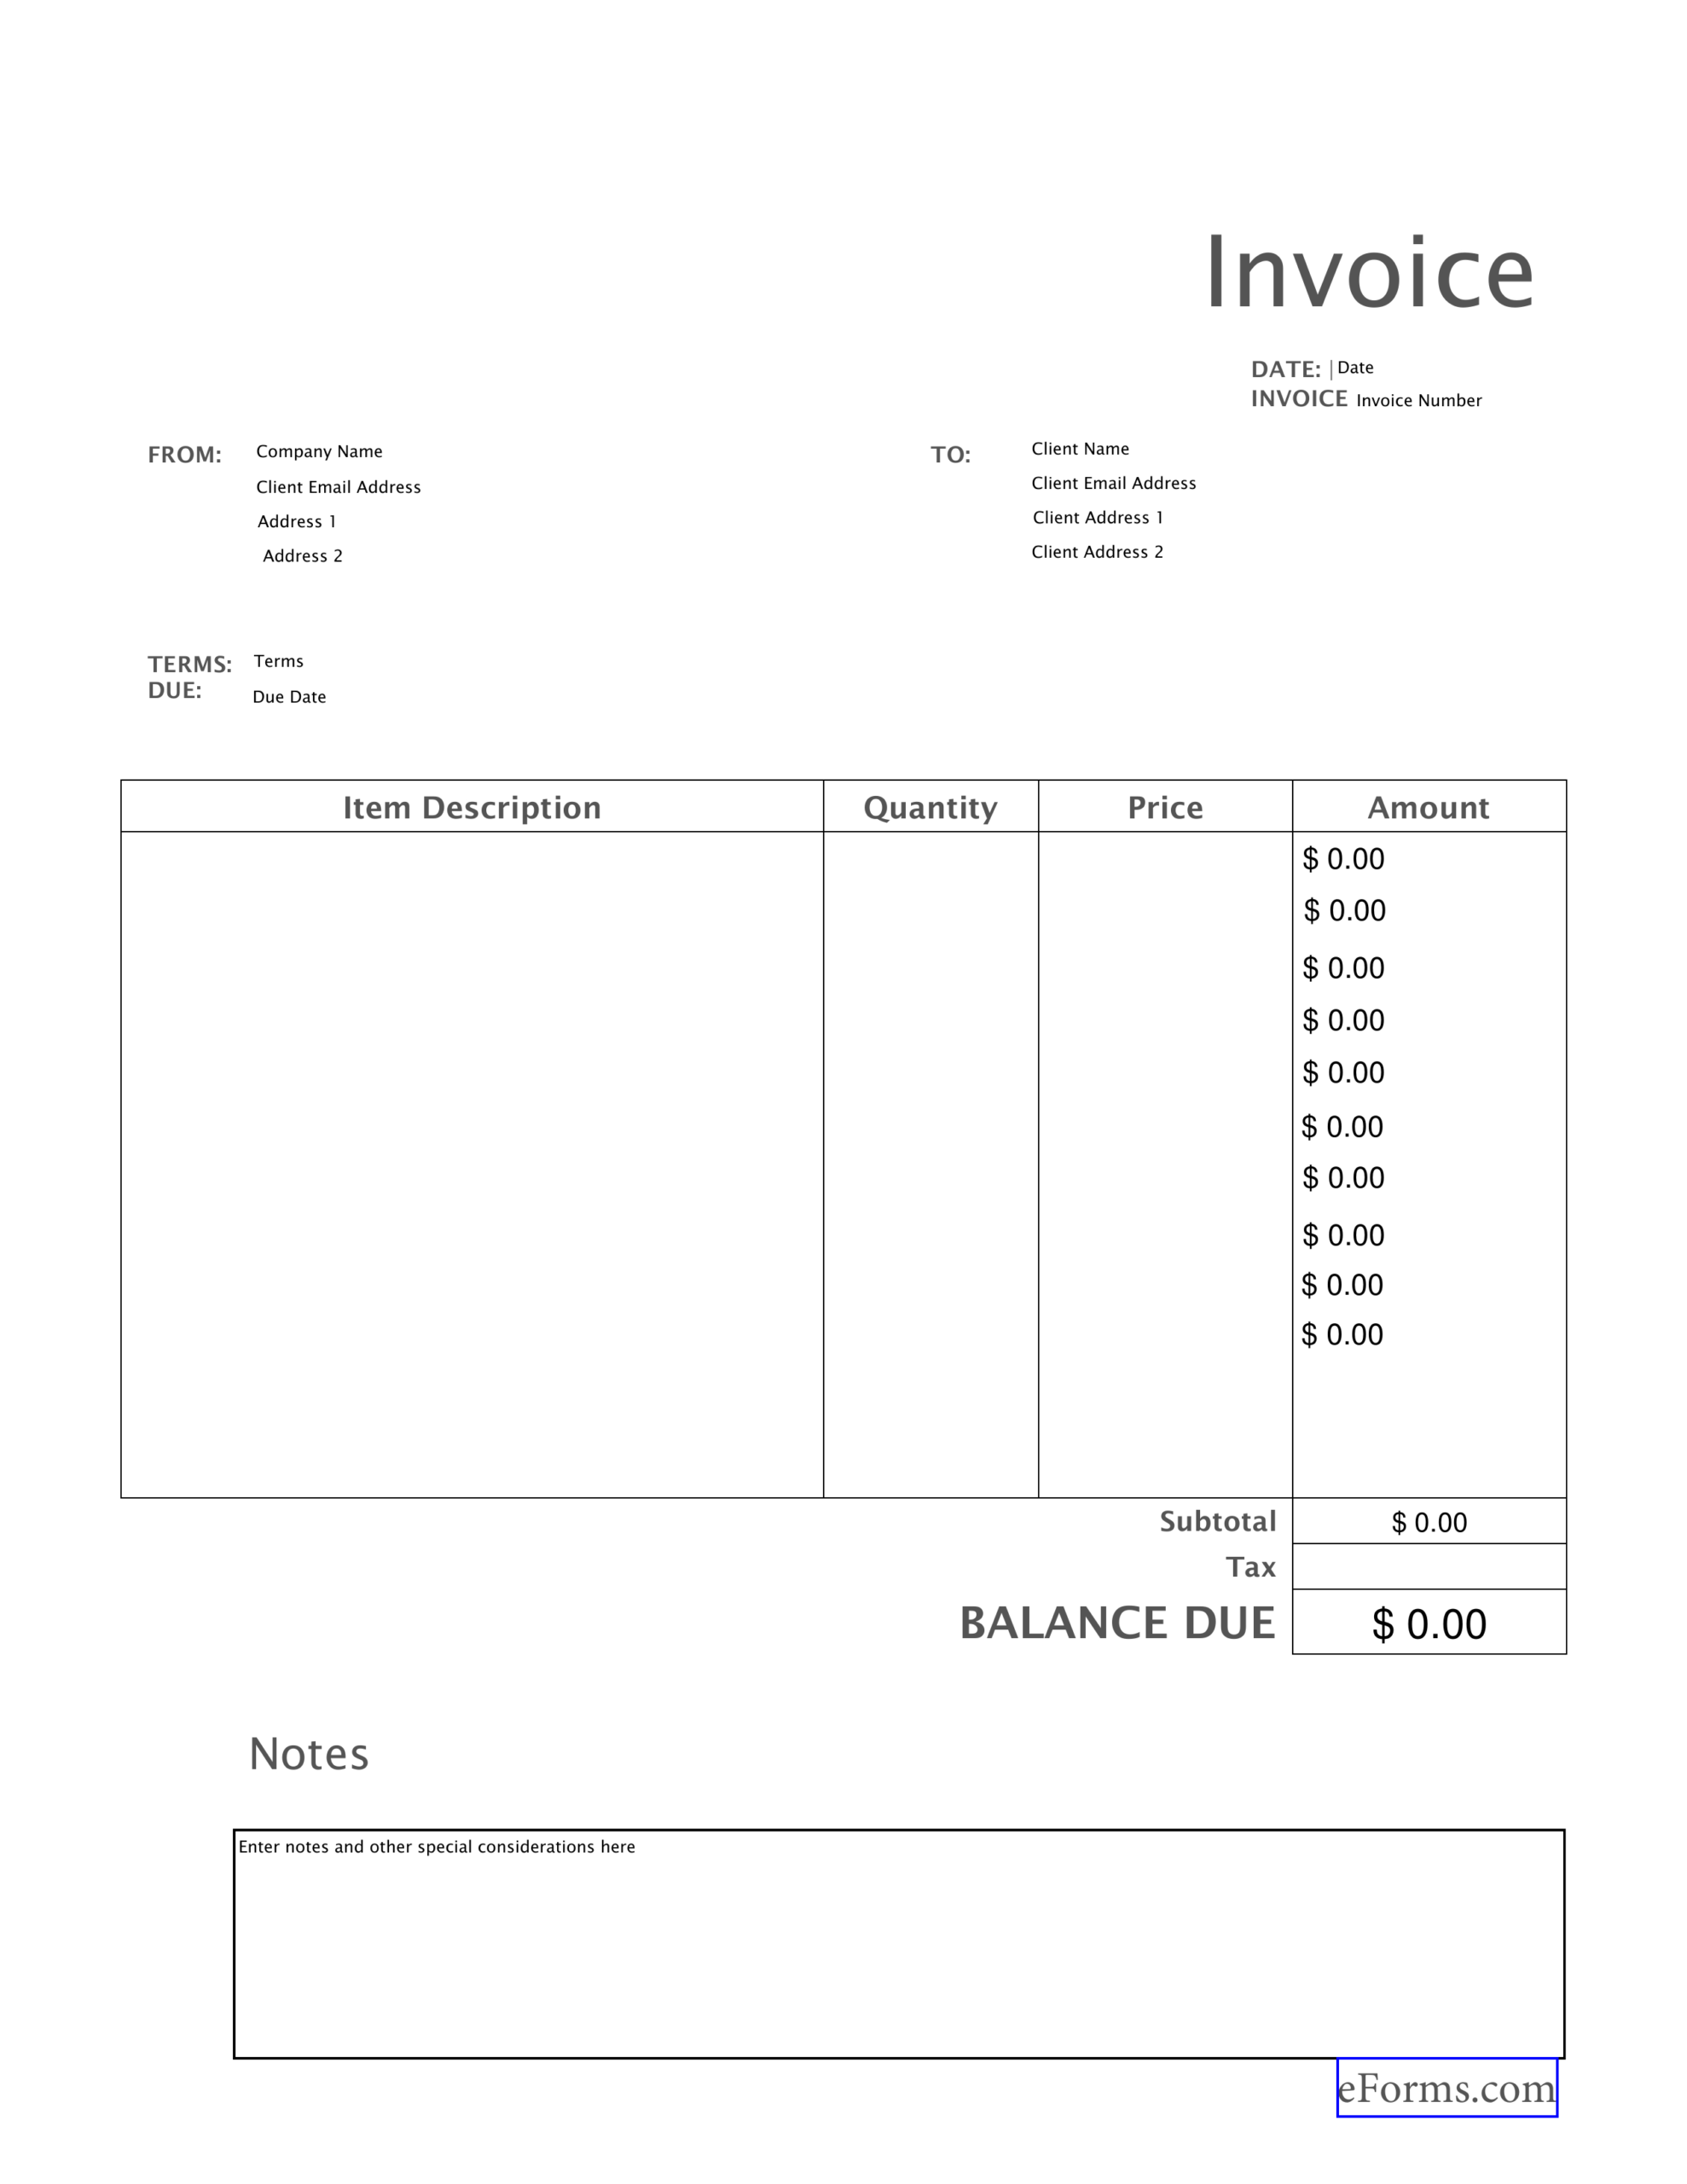 Free Blank Invoice Templates – Pdf | Eforms – Free Fillable With Regard To Free Downloadable Invoice Template For Word